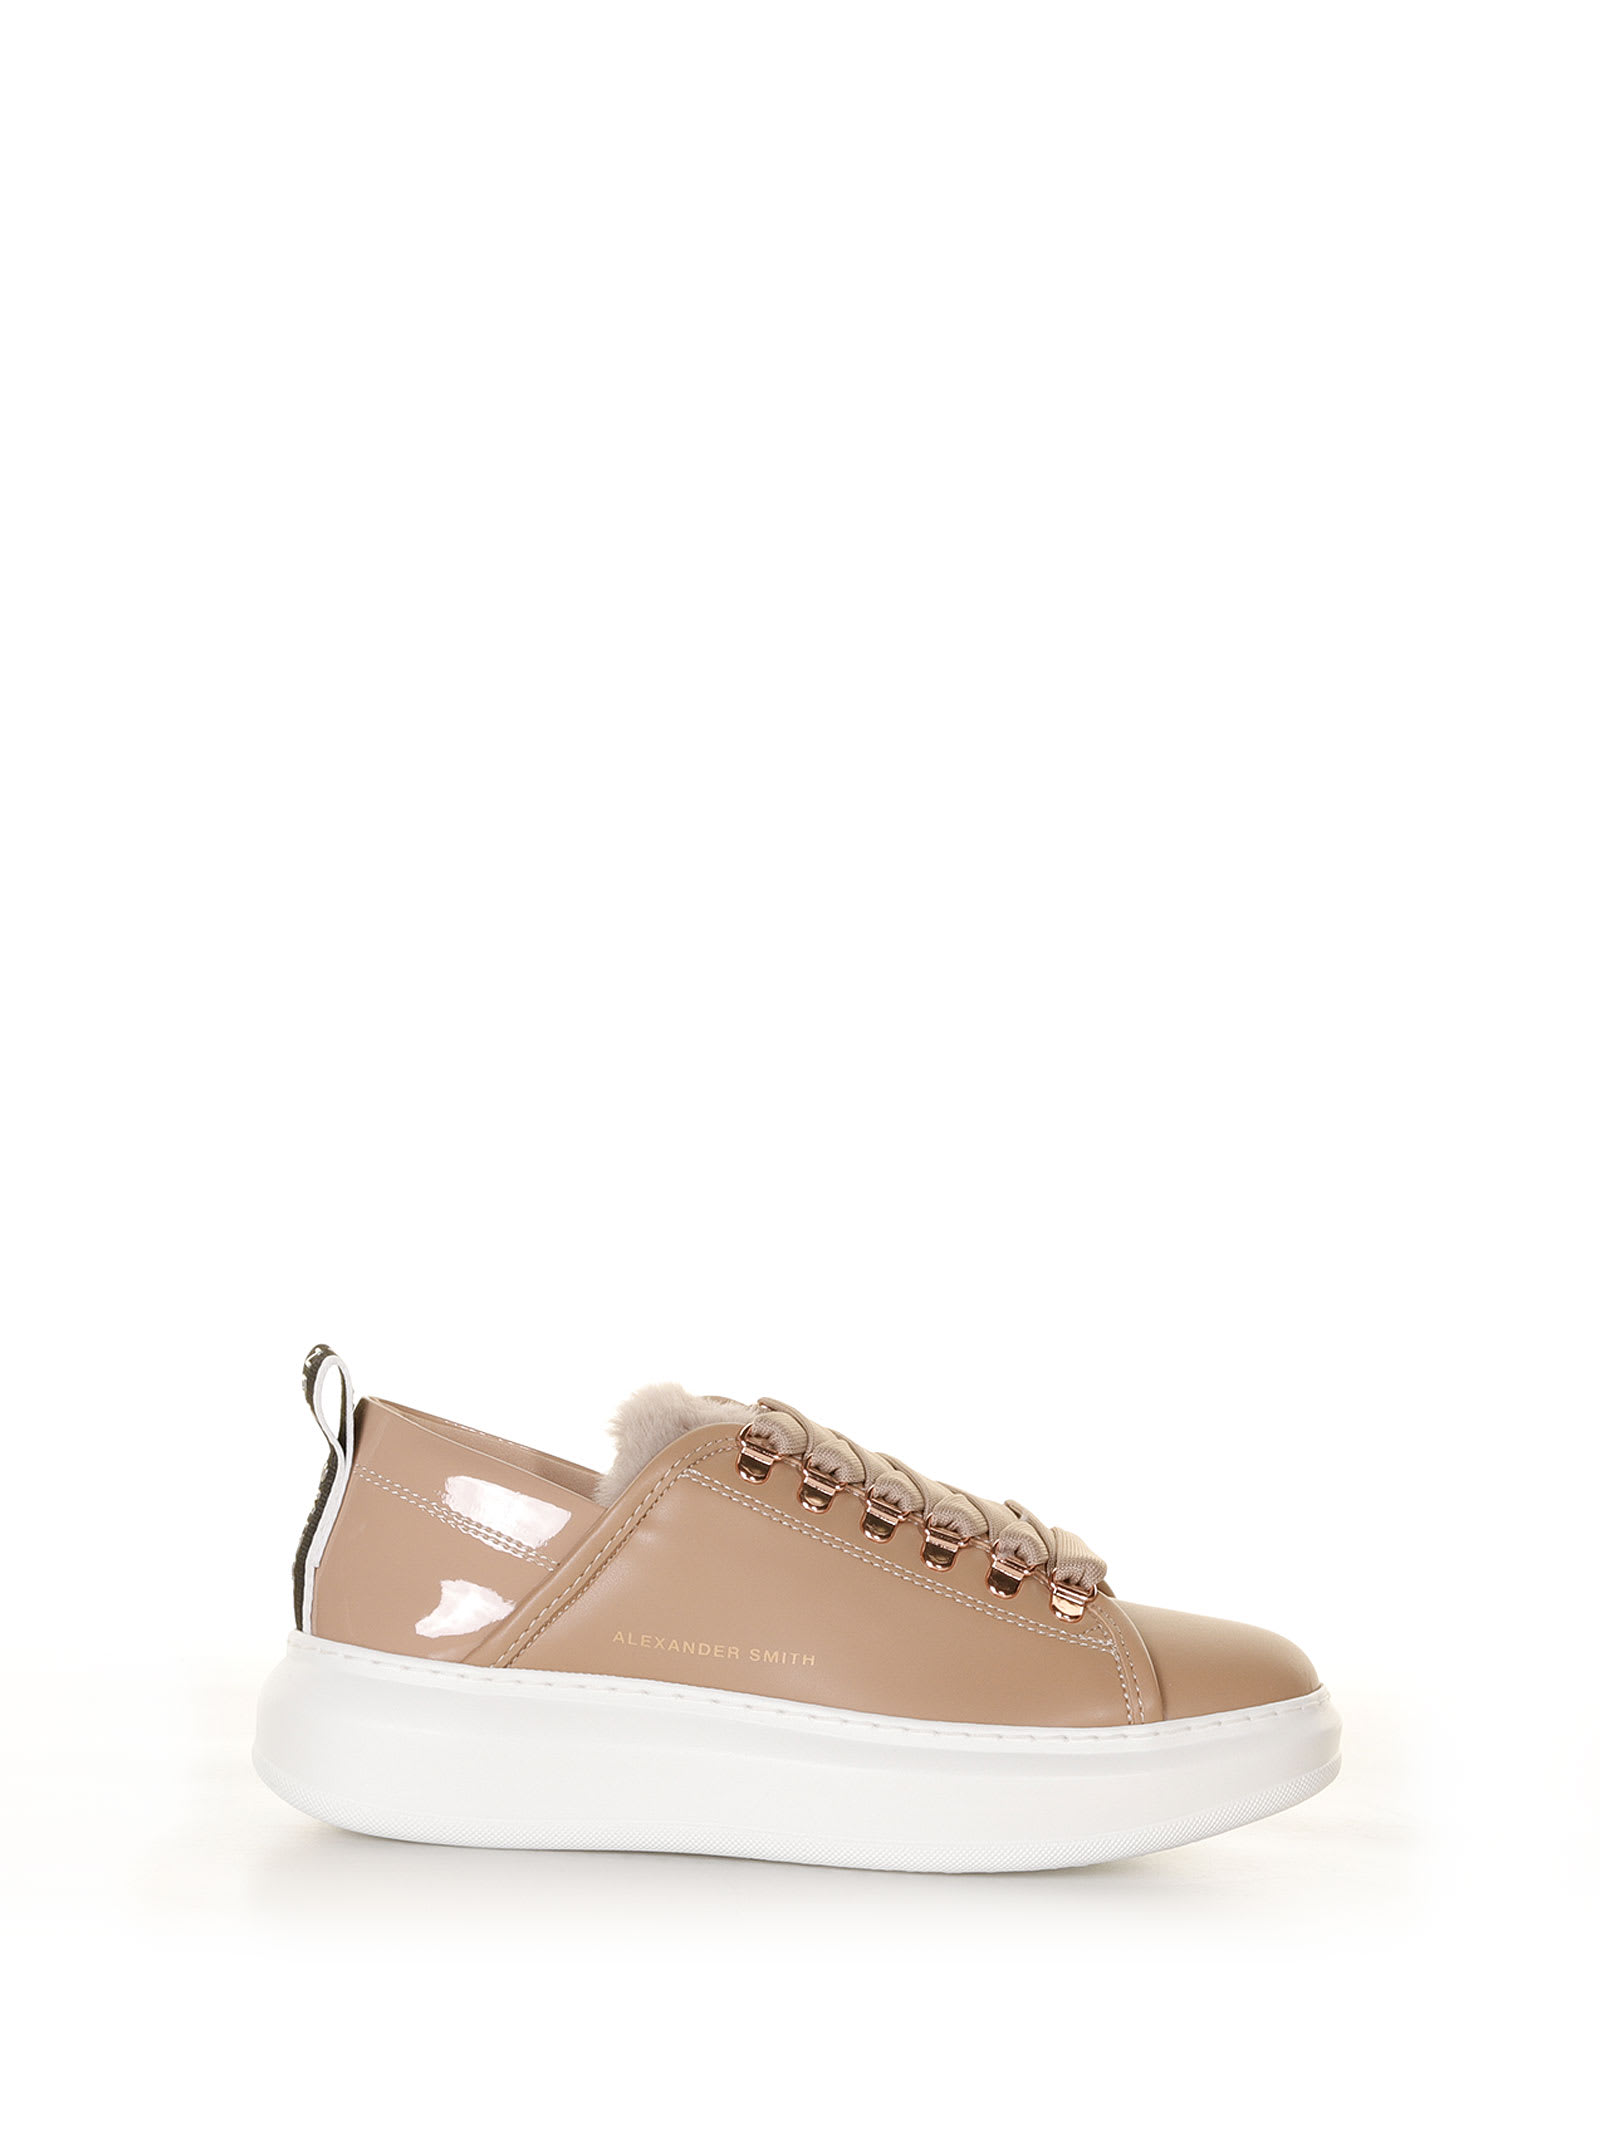 Alexander Smith Wembley Sneaker With Fur In Camel